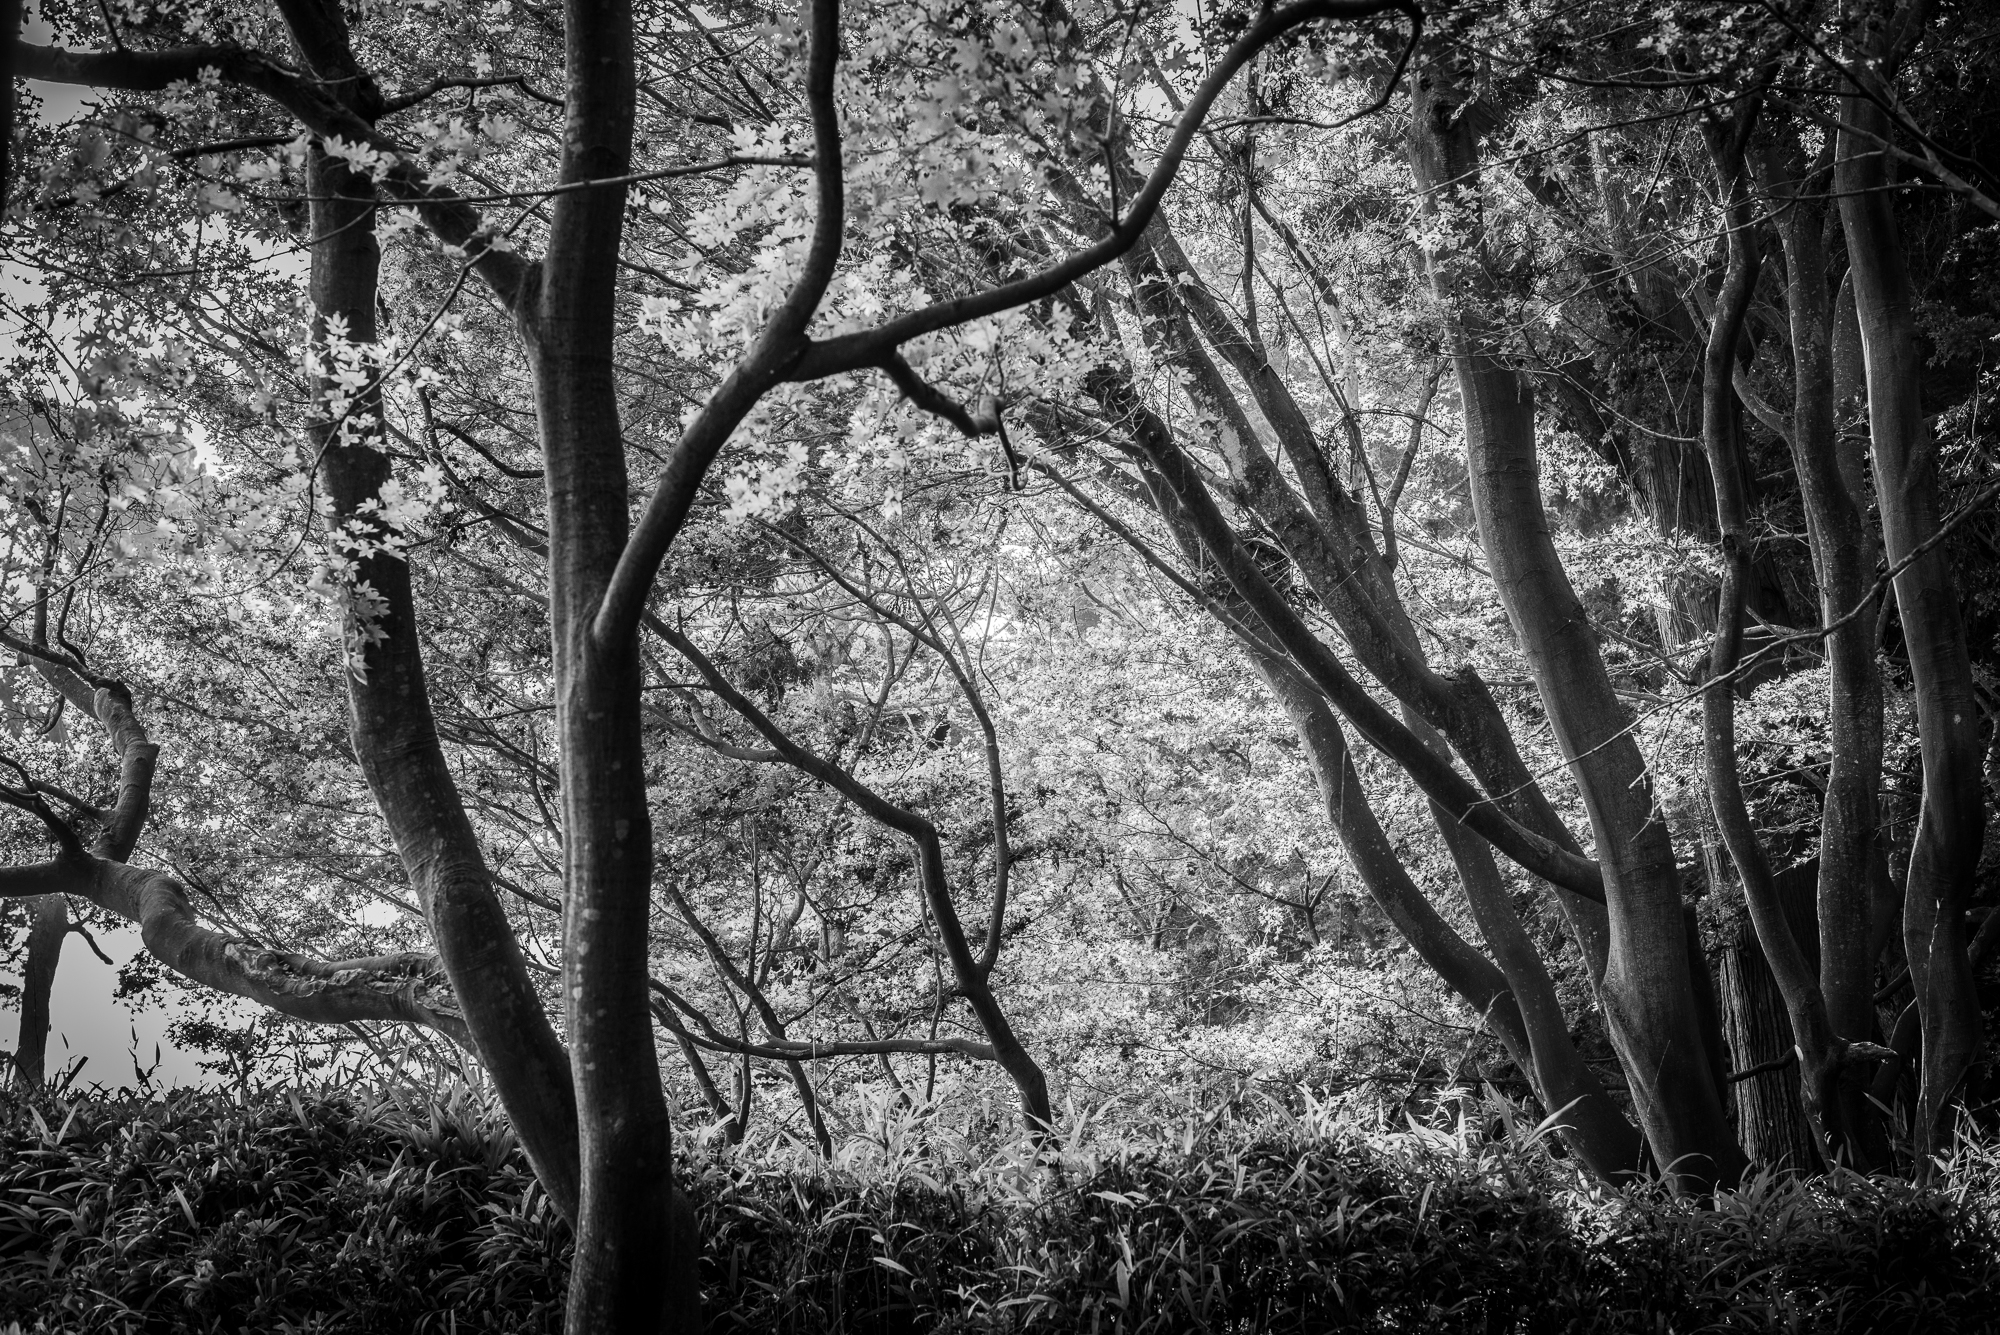 Photograph of trees and edges in the Japanese Garden in Golden Gate Park located in San Francisco.